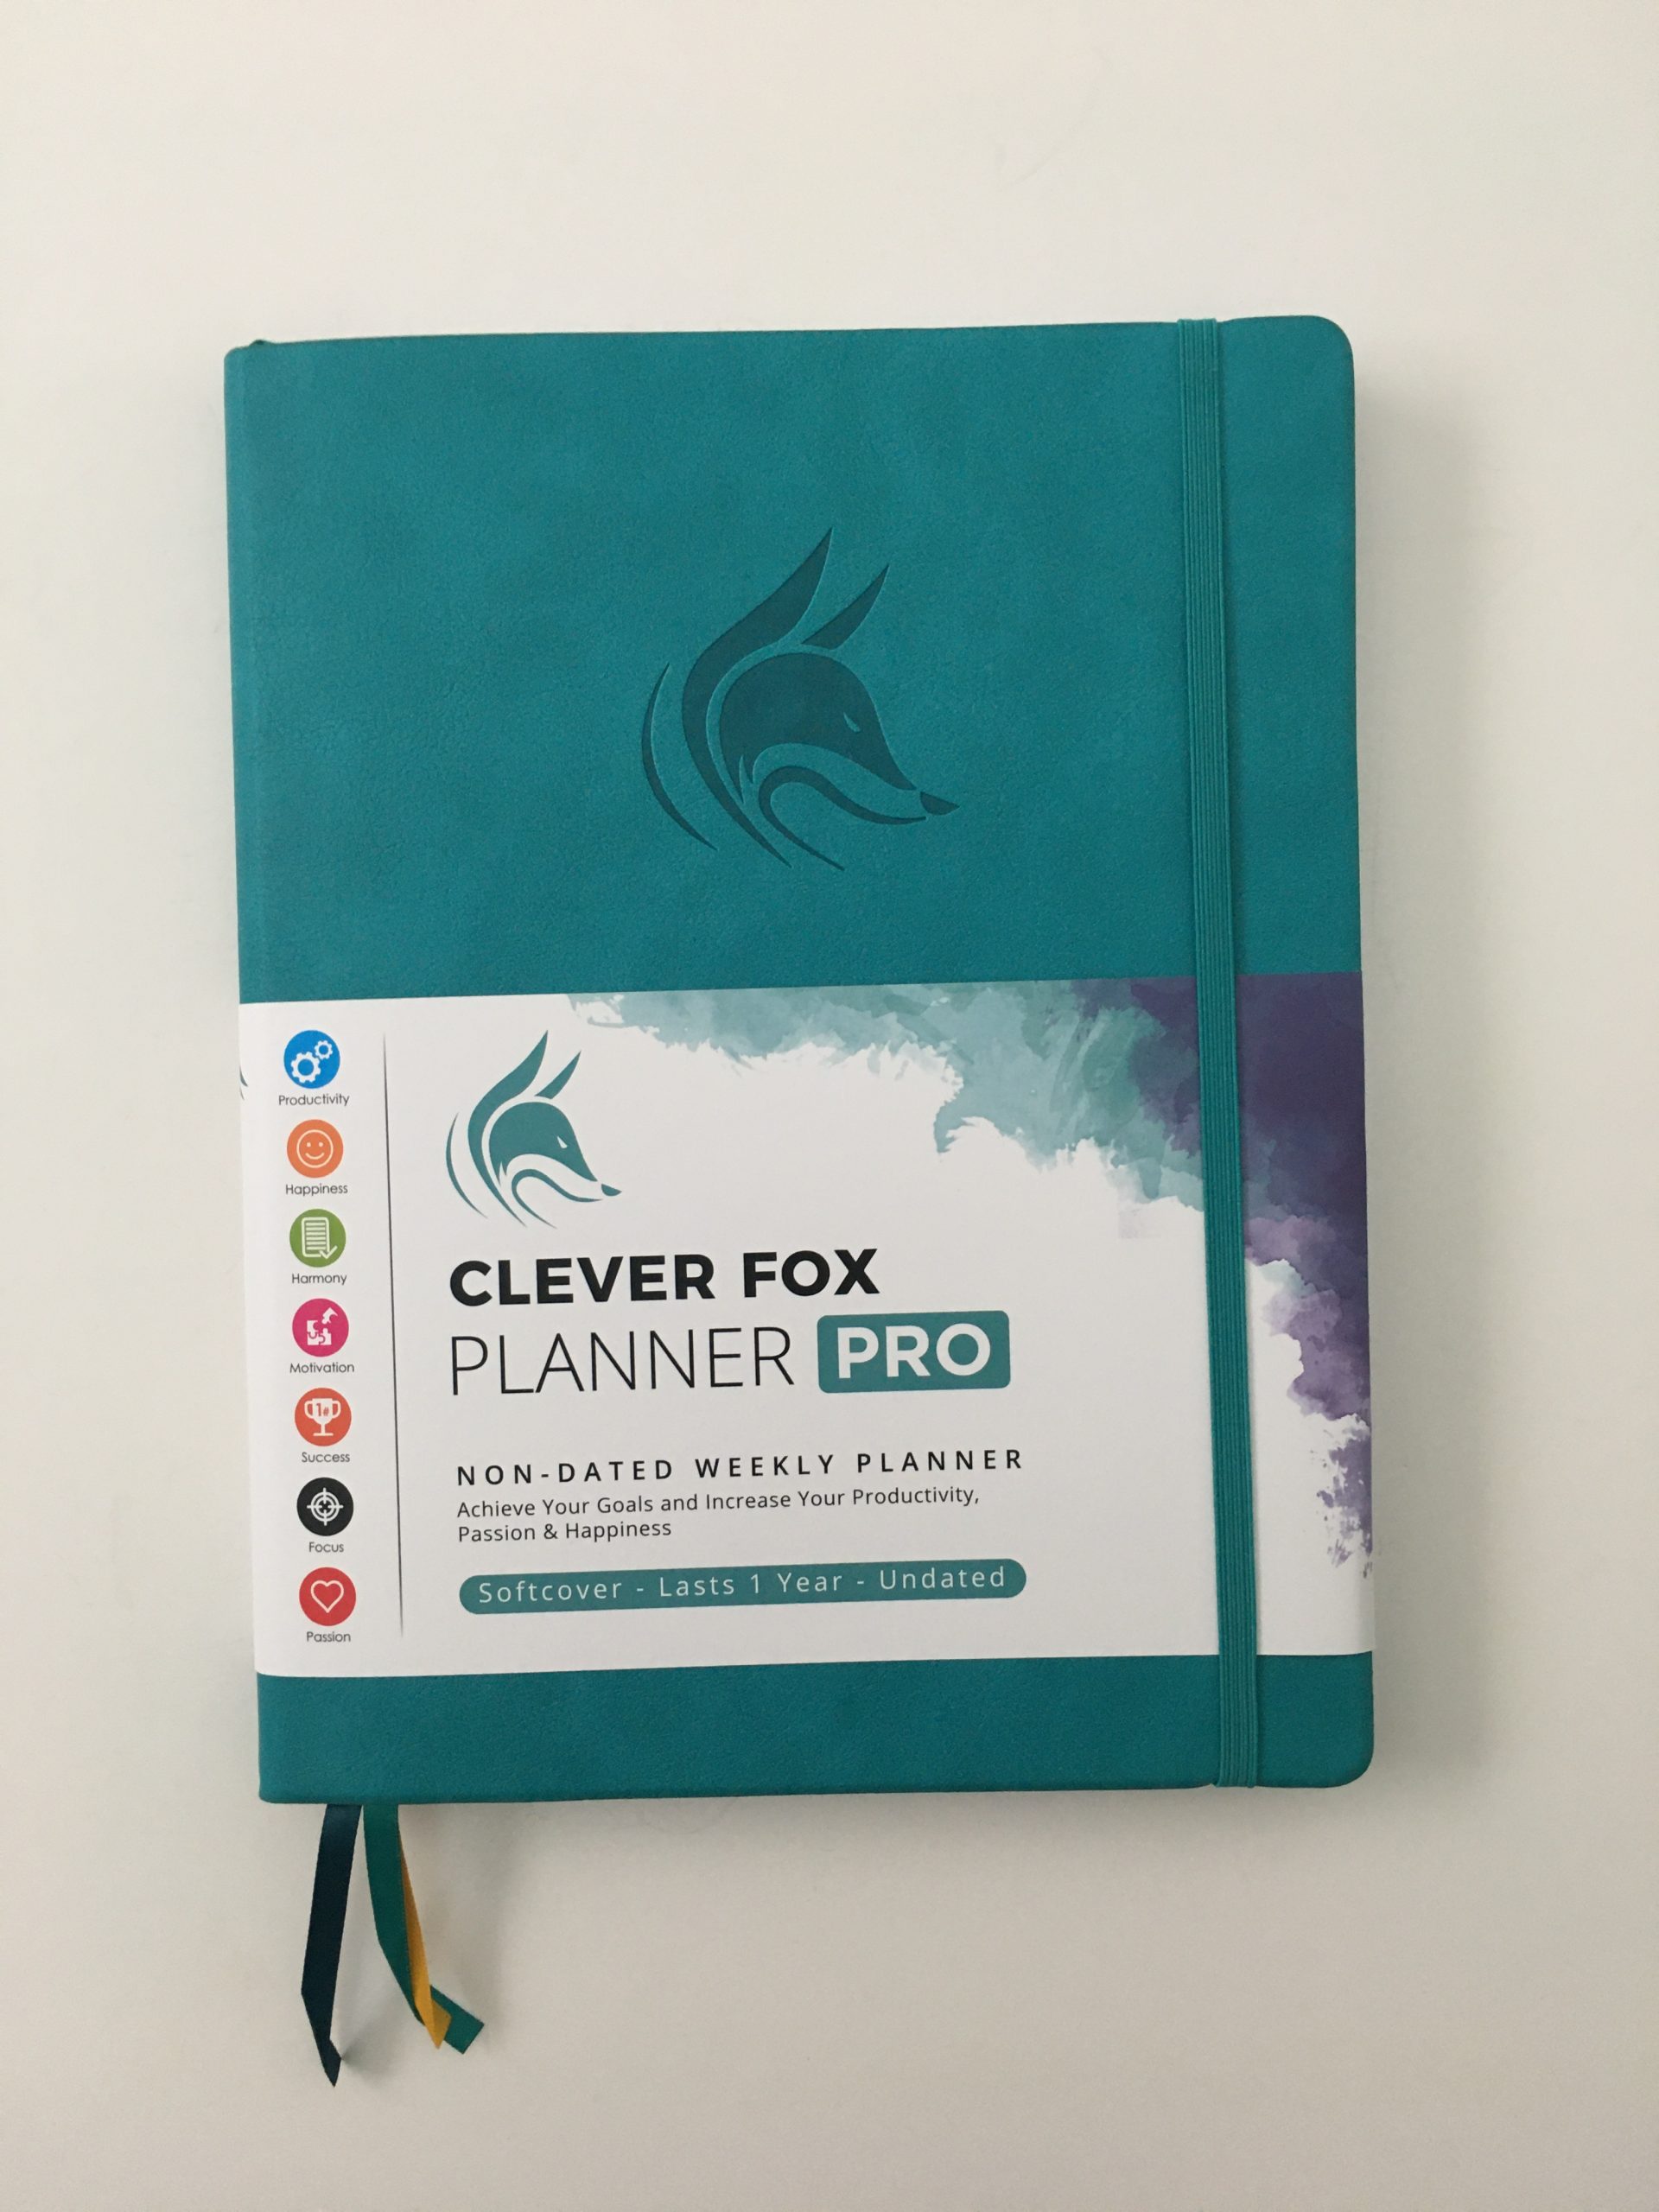 Clever fox pro weekly planner review affordable us letter page size functional layout goal planning bright white paper thick no ghosting video review_04